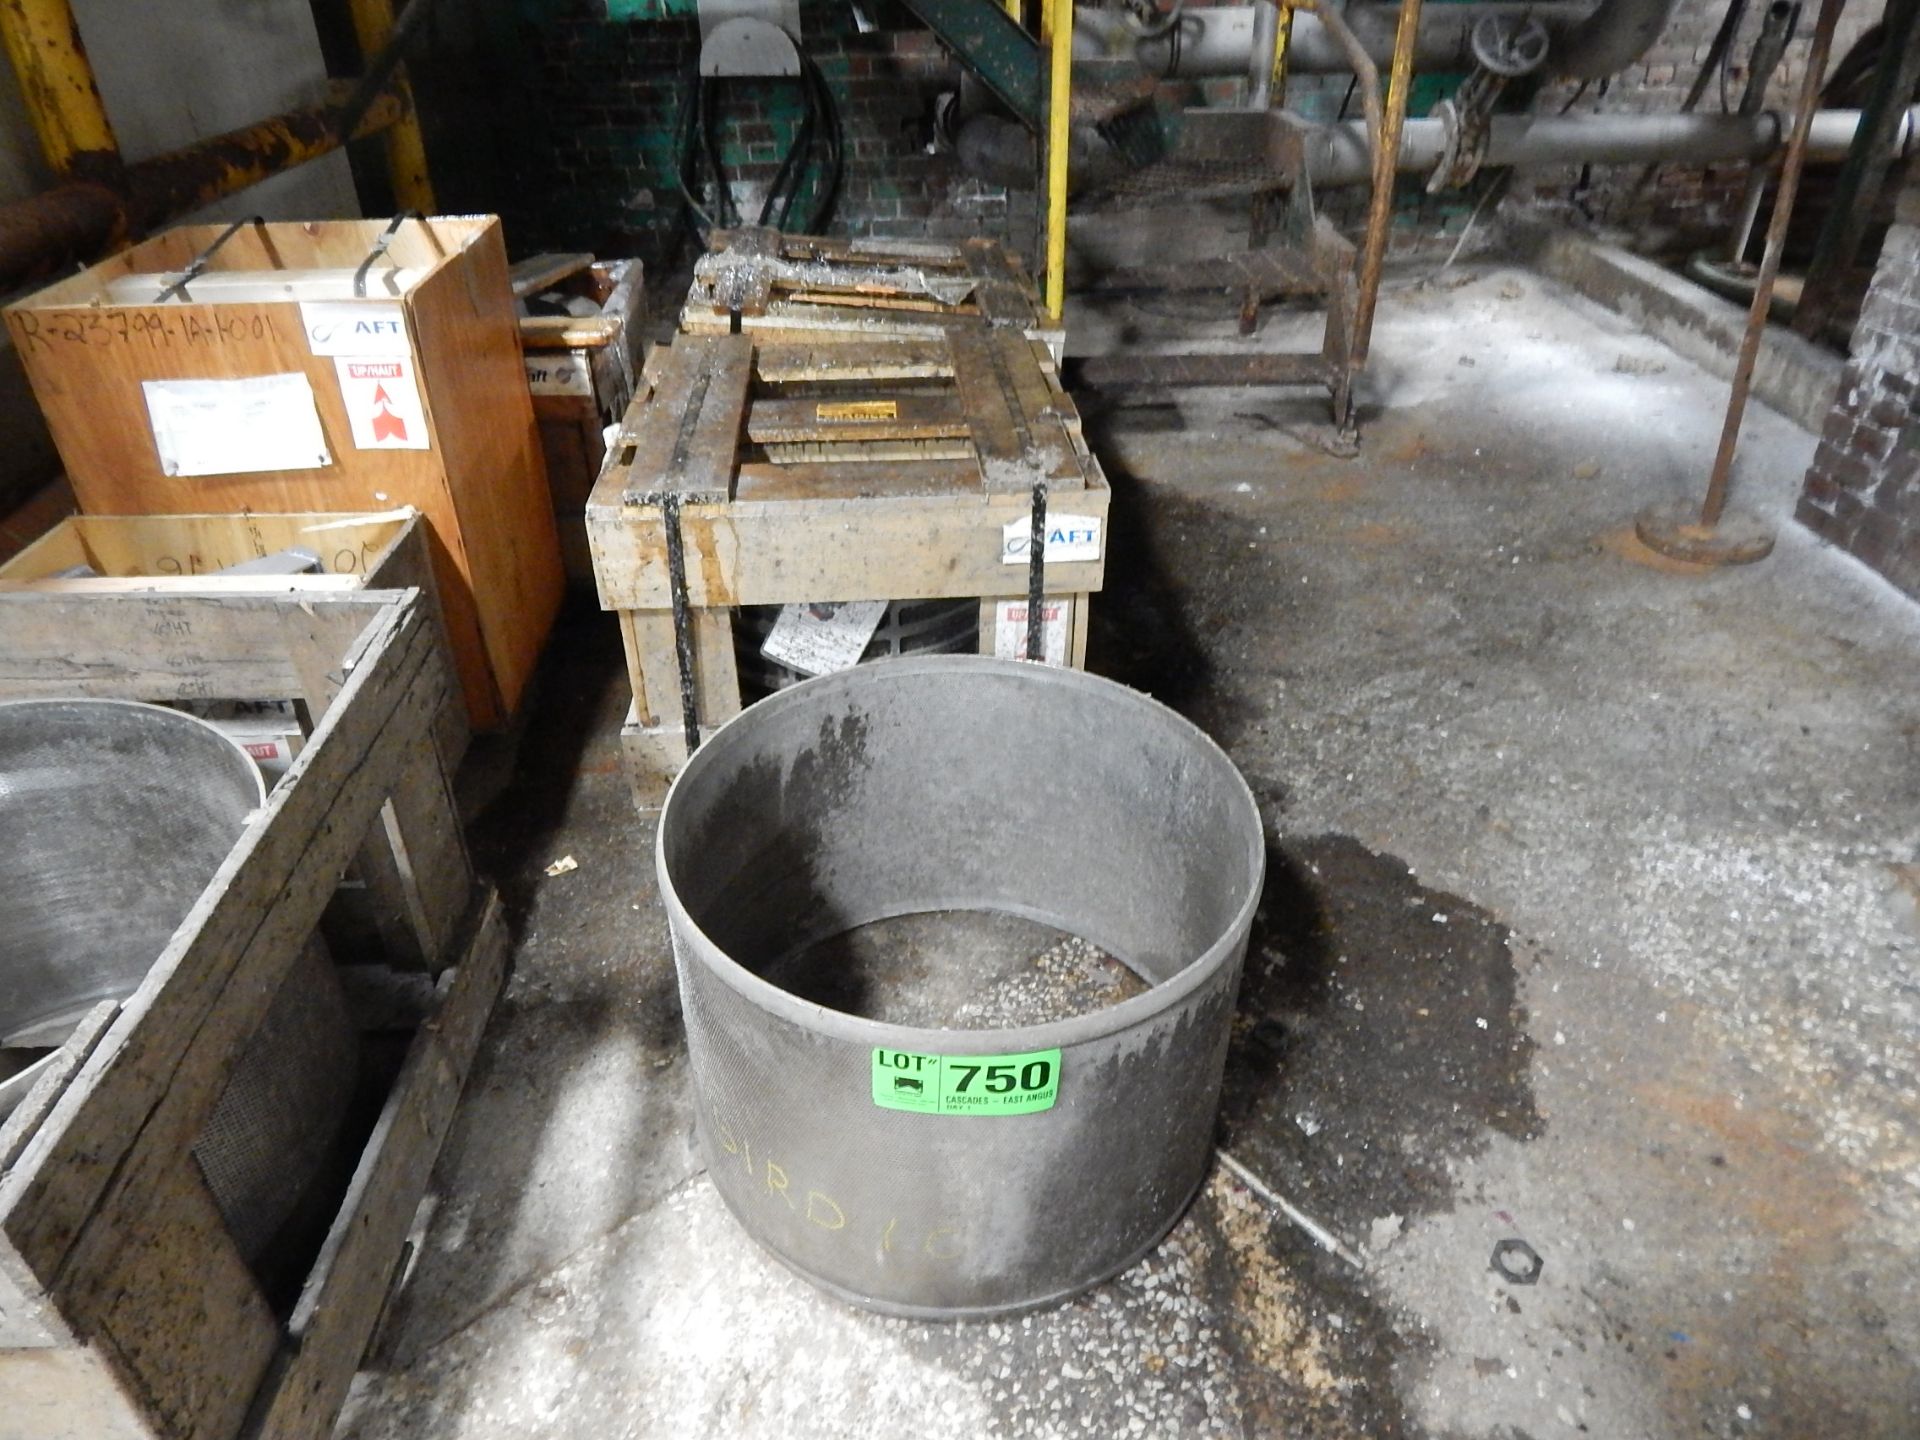 LOT/ SPARE STAINLESS STEEL BASKETS